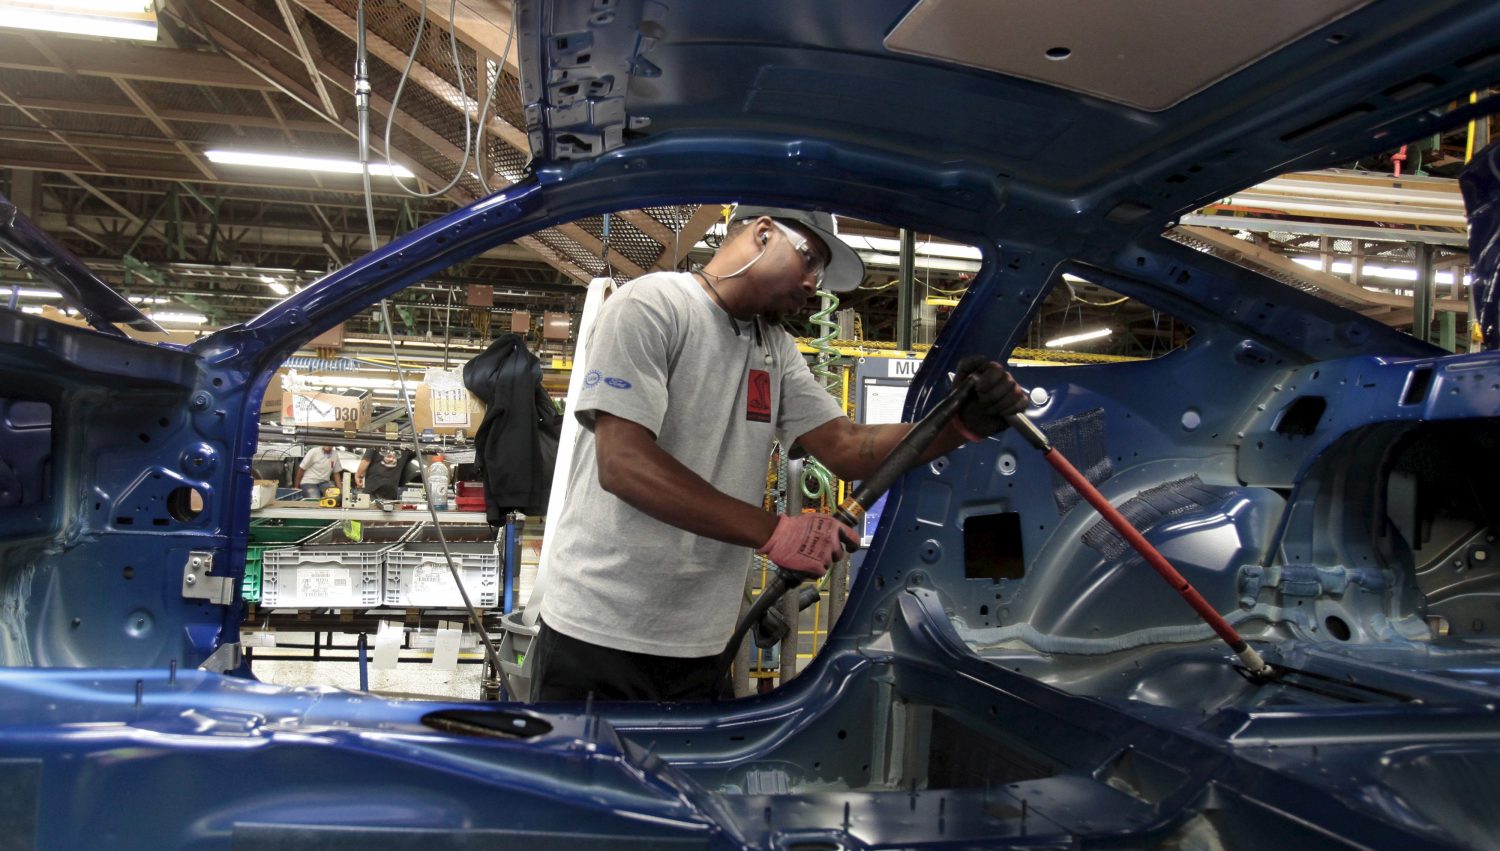 A Ford Motor assembly worker works on the frame of a 2015 Ford Mustang vehicle at the Ford Motor Flat Rock Assembly Plant in Flat Rock, Michigan, August 20, 2015. REUTERS/Rebecca Cook - RTX1OYPW